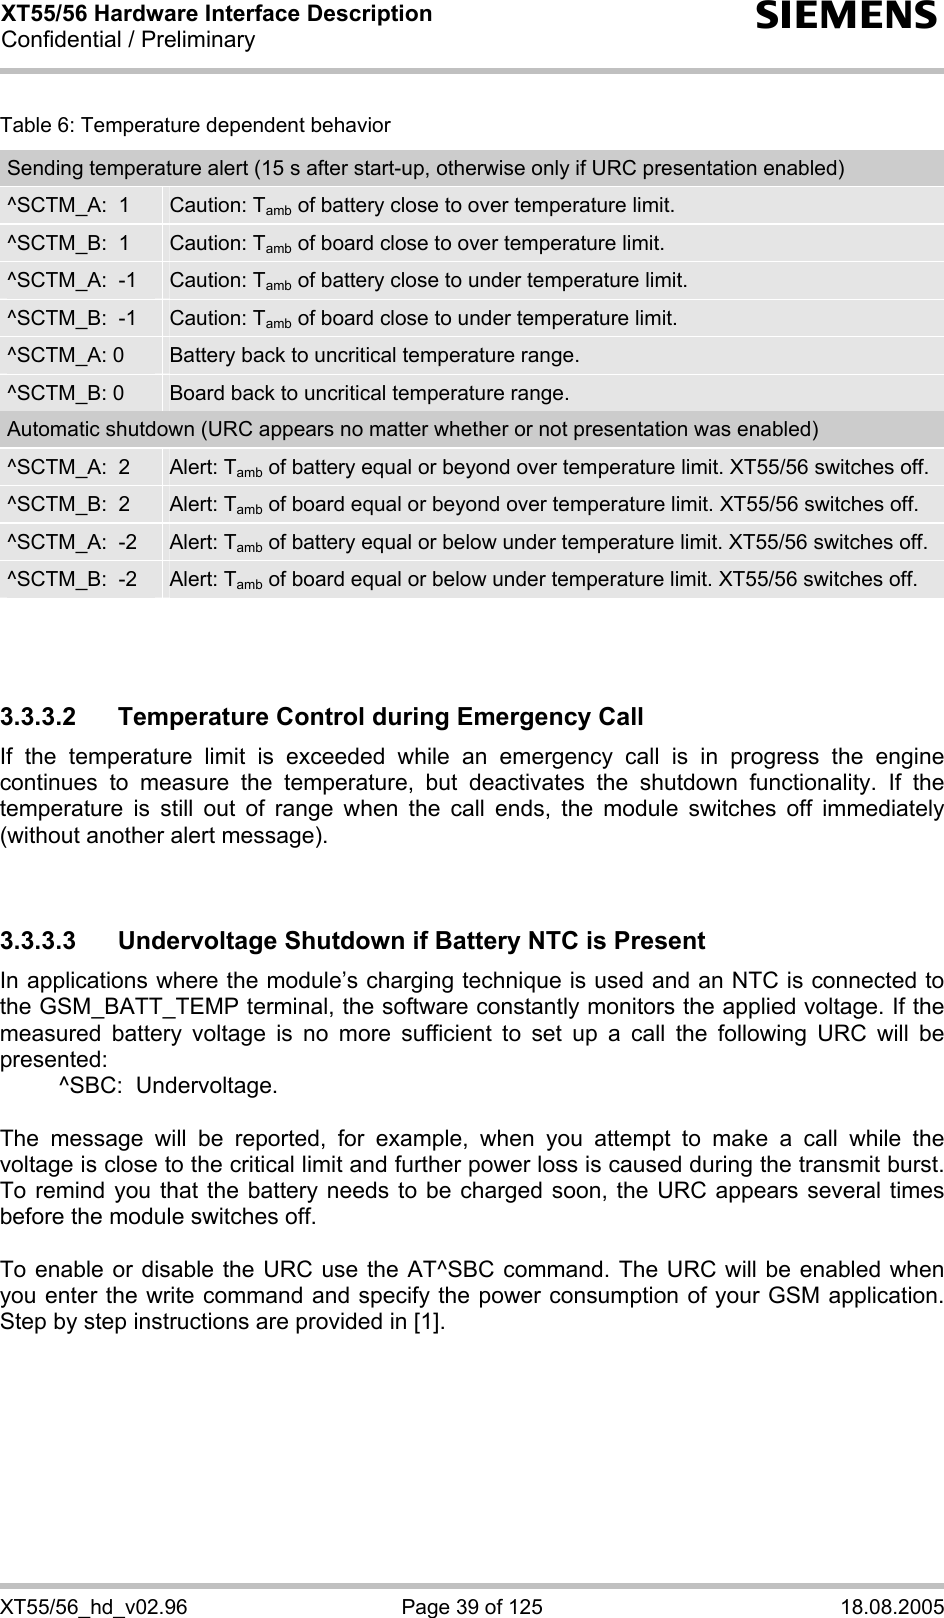 XT55/56 Hardware Interface Description Confidential / Preliminary s XT55/56_hd_v02.96  Page 39 of 125  18.08.2005 Table 6: Temperature dependent behavior Sending temperature alert (15 s after start-up, otherwise only if URC presentation enabled) ^SCTM_A:  1  Caution: Tamb of battery close to over temperature limit. ^SCTM_B:  1  Caution: Tamb of board close to over temperature limit. ^SCTM_A:  -1  Caution: Tamb of battery close to under temperature limit. ^SCTM_B:  -1  Caution: Tamb of board close to under temperature limit. ^SCTM_A: 0  Battery back to uncritical temperature range. ^SCTM_B: 0  Board back to uncritical temperature range. Automatic shutdown (URC appears no matter whether or not presentation was enabled) ^SCTM_A:  2  Alert: Tamb of battery equal or beyond over temperature limit. XT55/56 switches off. ^SCTM_B:  2  Alert: Tamb of board equal or beyond over temperature limit. XT55/56 switches off. ^SCTM_A:  -2  Alert: Tamb of battery equal or below under temperature limit. XT55/56 switches off. ^SCTM_B:  -2  Alert: Tamb of board equal or below under temperature limit. XT55/56 switches off.    3.3.3.2  Temperature Control during Emergency Call If the temperature limit is exceeded while an emergency call is in progress the engine continues to measure the temperature, but deactivates the shutdown functionality. If the temperature is still out of range when the call ends, the module switches off immediately (without another alert message).   3.3.3.3  Undervoltage Shutdown if Battery NTC is Present In applications where the module’s charging technique is used and an NTC is connected to the GSM_BATT_TEMP terminal, the software constantly monitors the applied voltage. If the measured battery voltage is no more sufficient to set up a call the following URC will be presented:    ^SBC:  Undervoltage.  The message will be reported, for example, when you attempt to make a call while the voltage is close to the critical limit and further power loss is caused during the transmit burst. To remind you that the battery needs to be charged soon, the URC appears several times before the module switches off.   To enable or disable the URC use the AT^SBC command. The URC will be enabled when you enter the write command and specify the power consumption of your GSM application. Step by step instructions are provided in [1].   